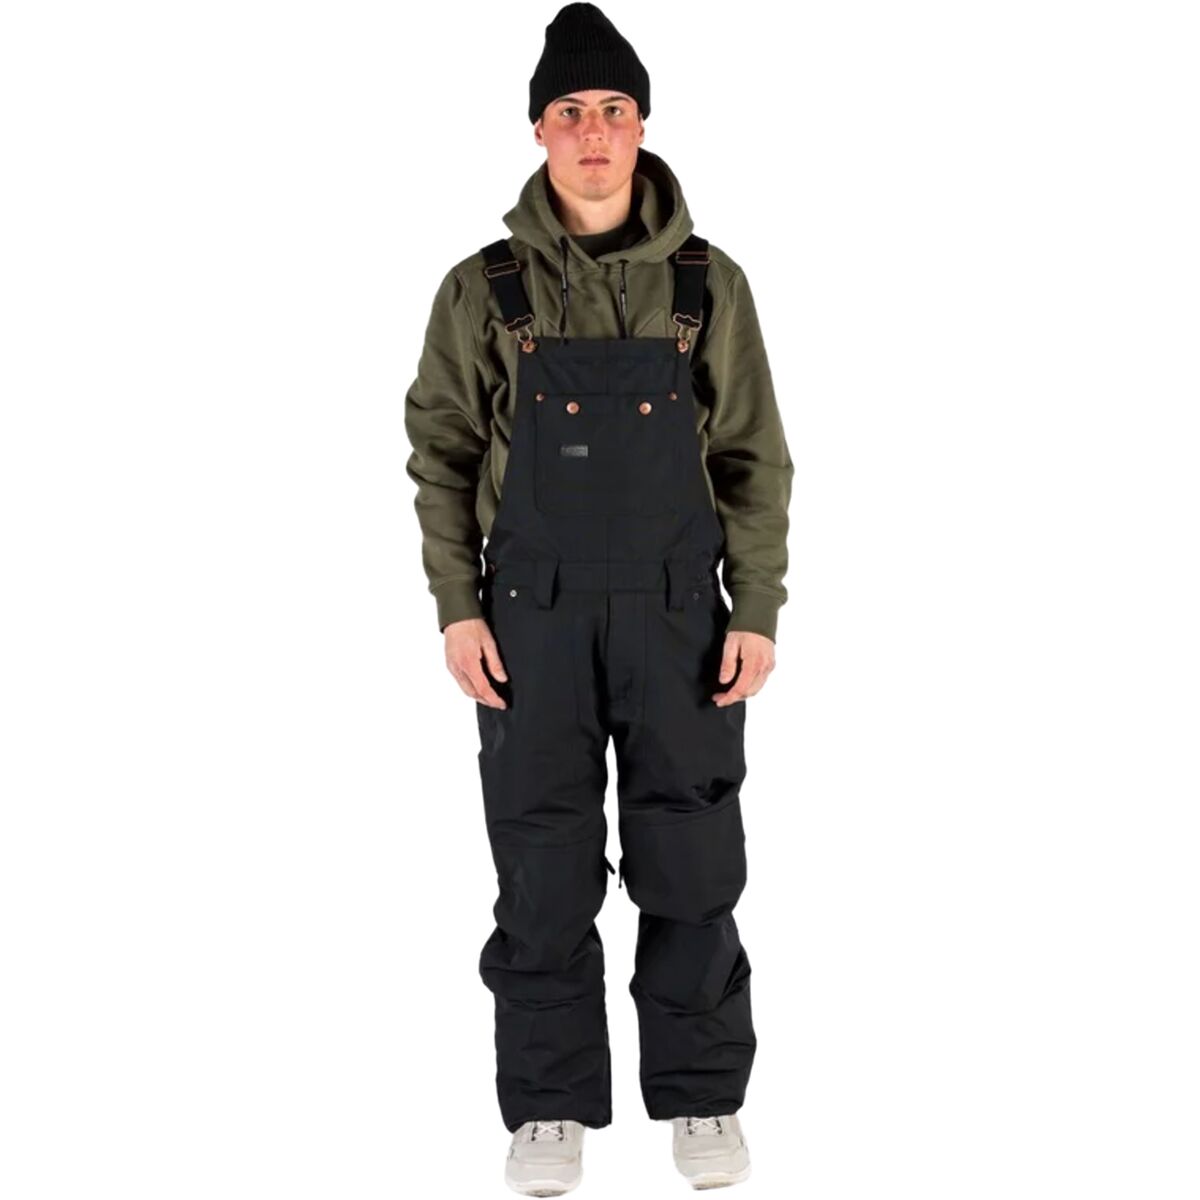 L1 Overall Pant - Men's